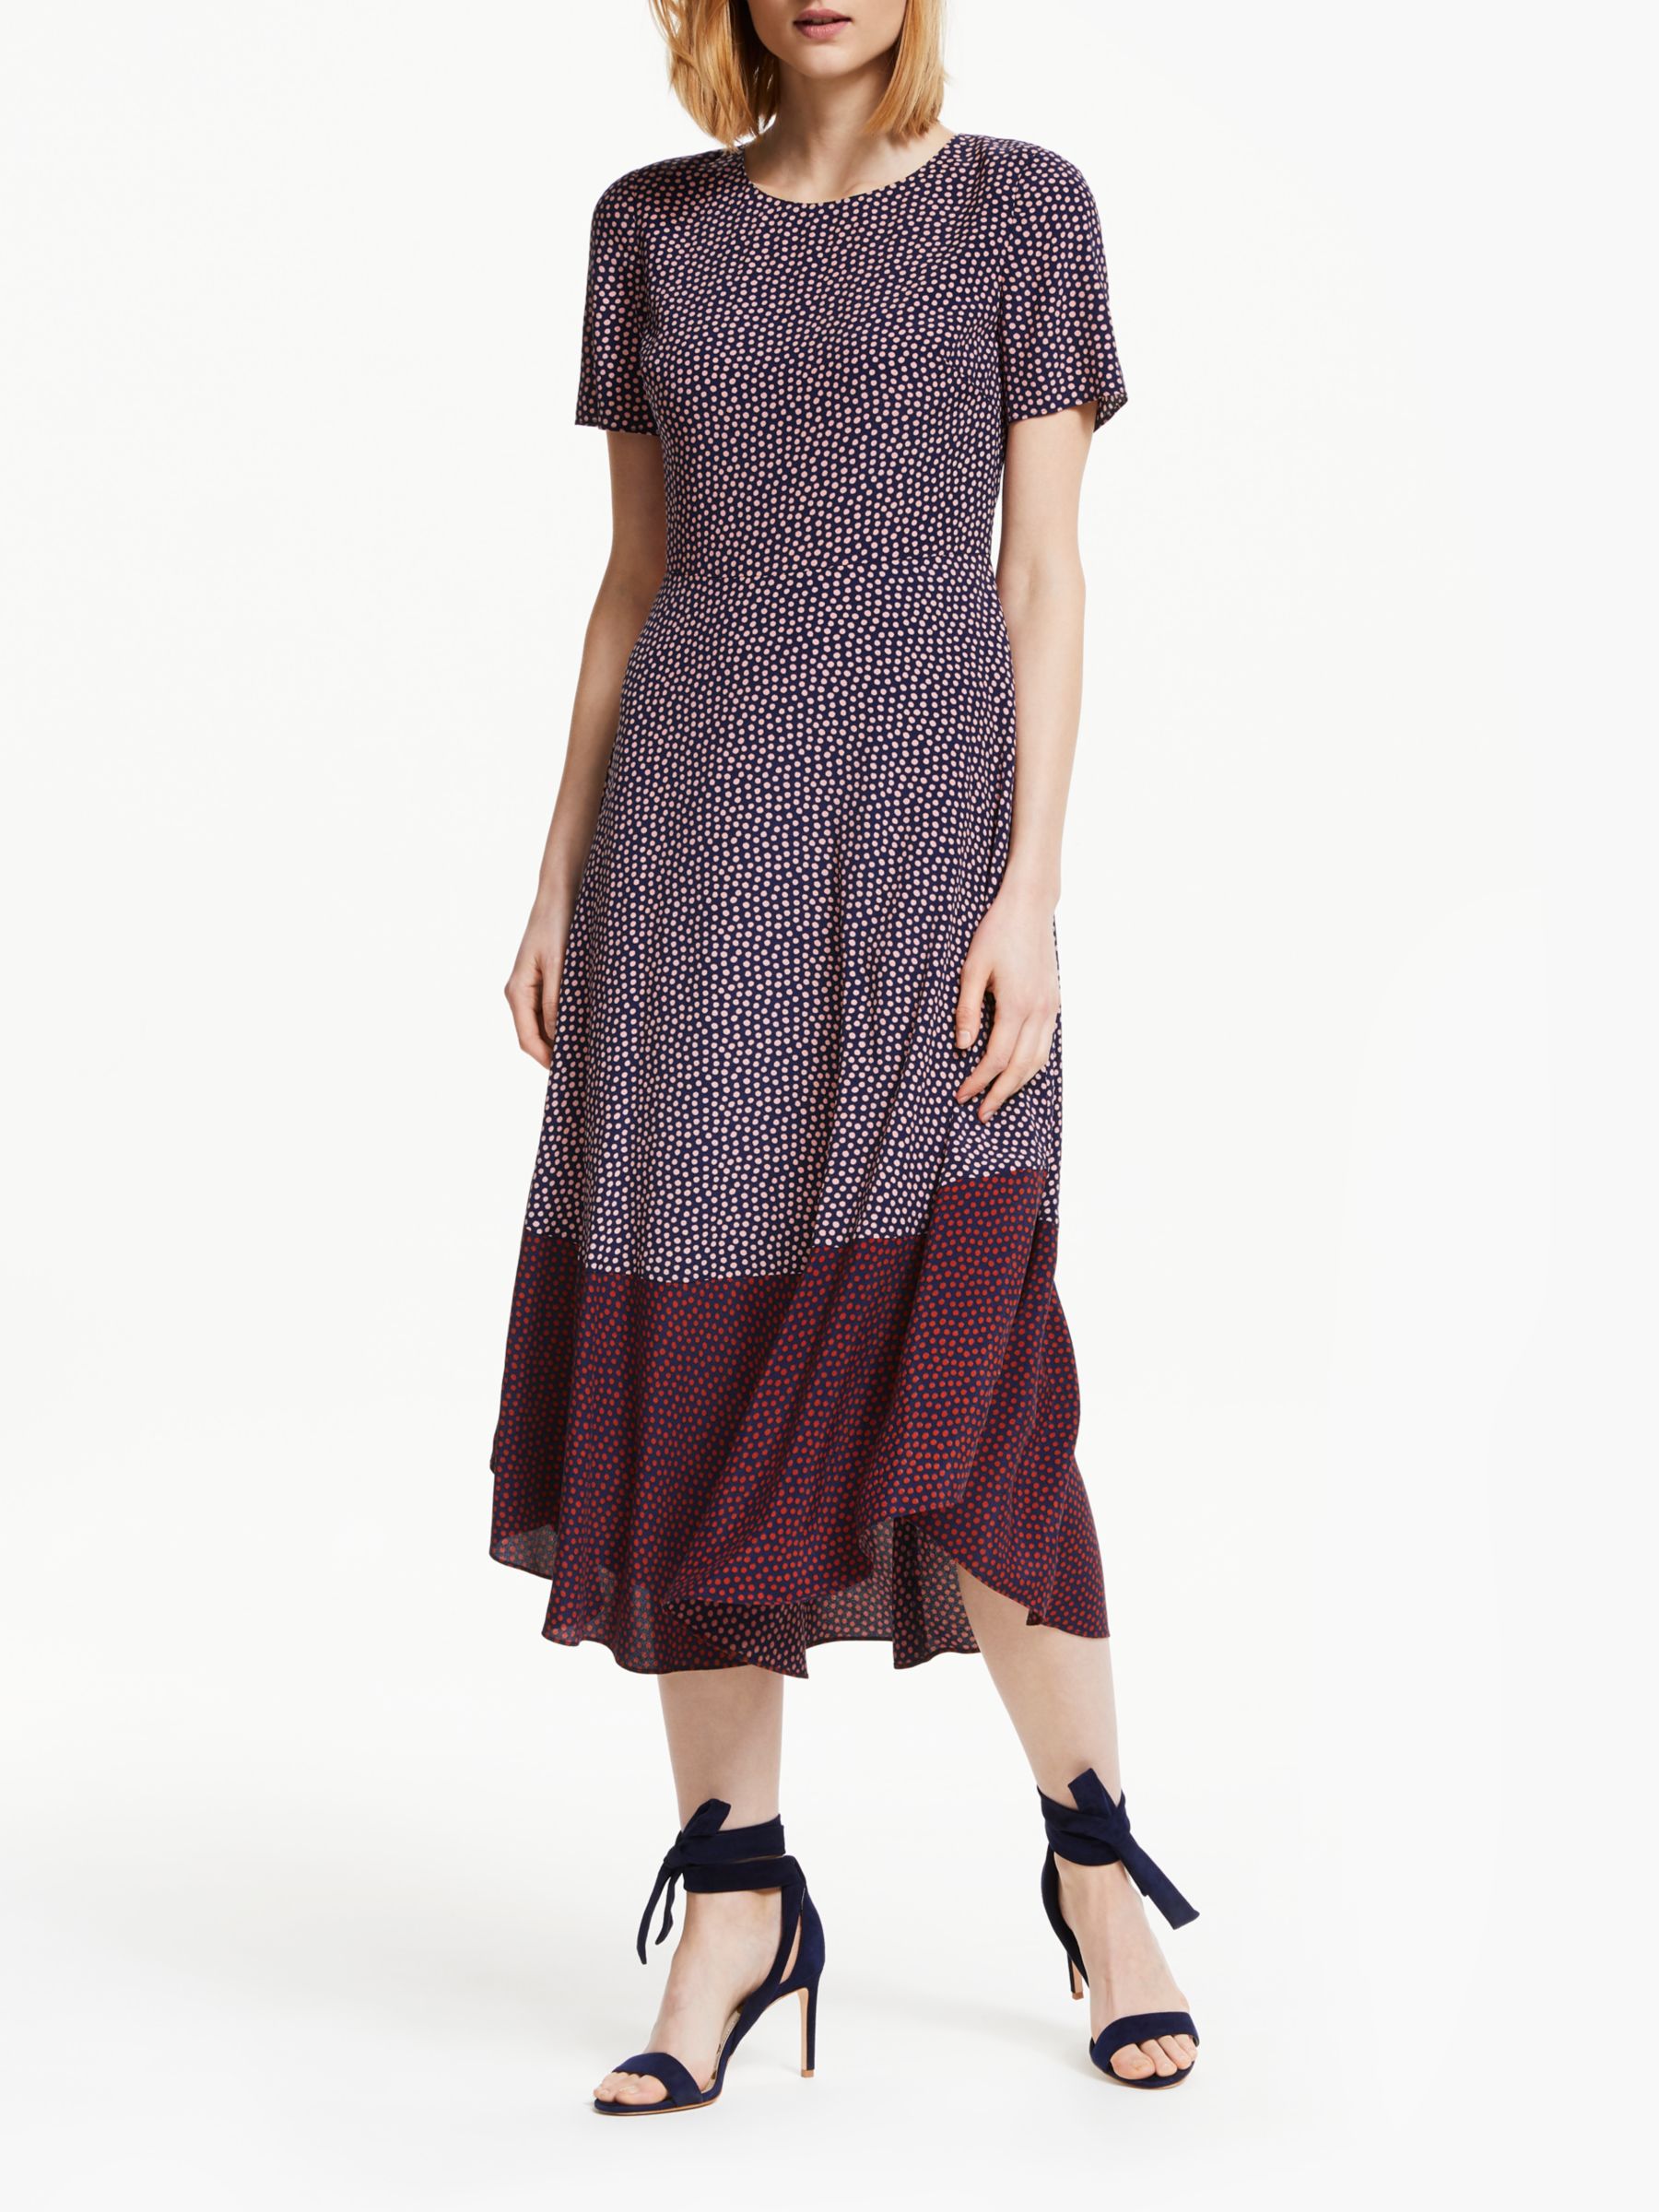 Boden Renee Midi Dress, Navy/Chalky Pink at John Lewis & Partners